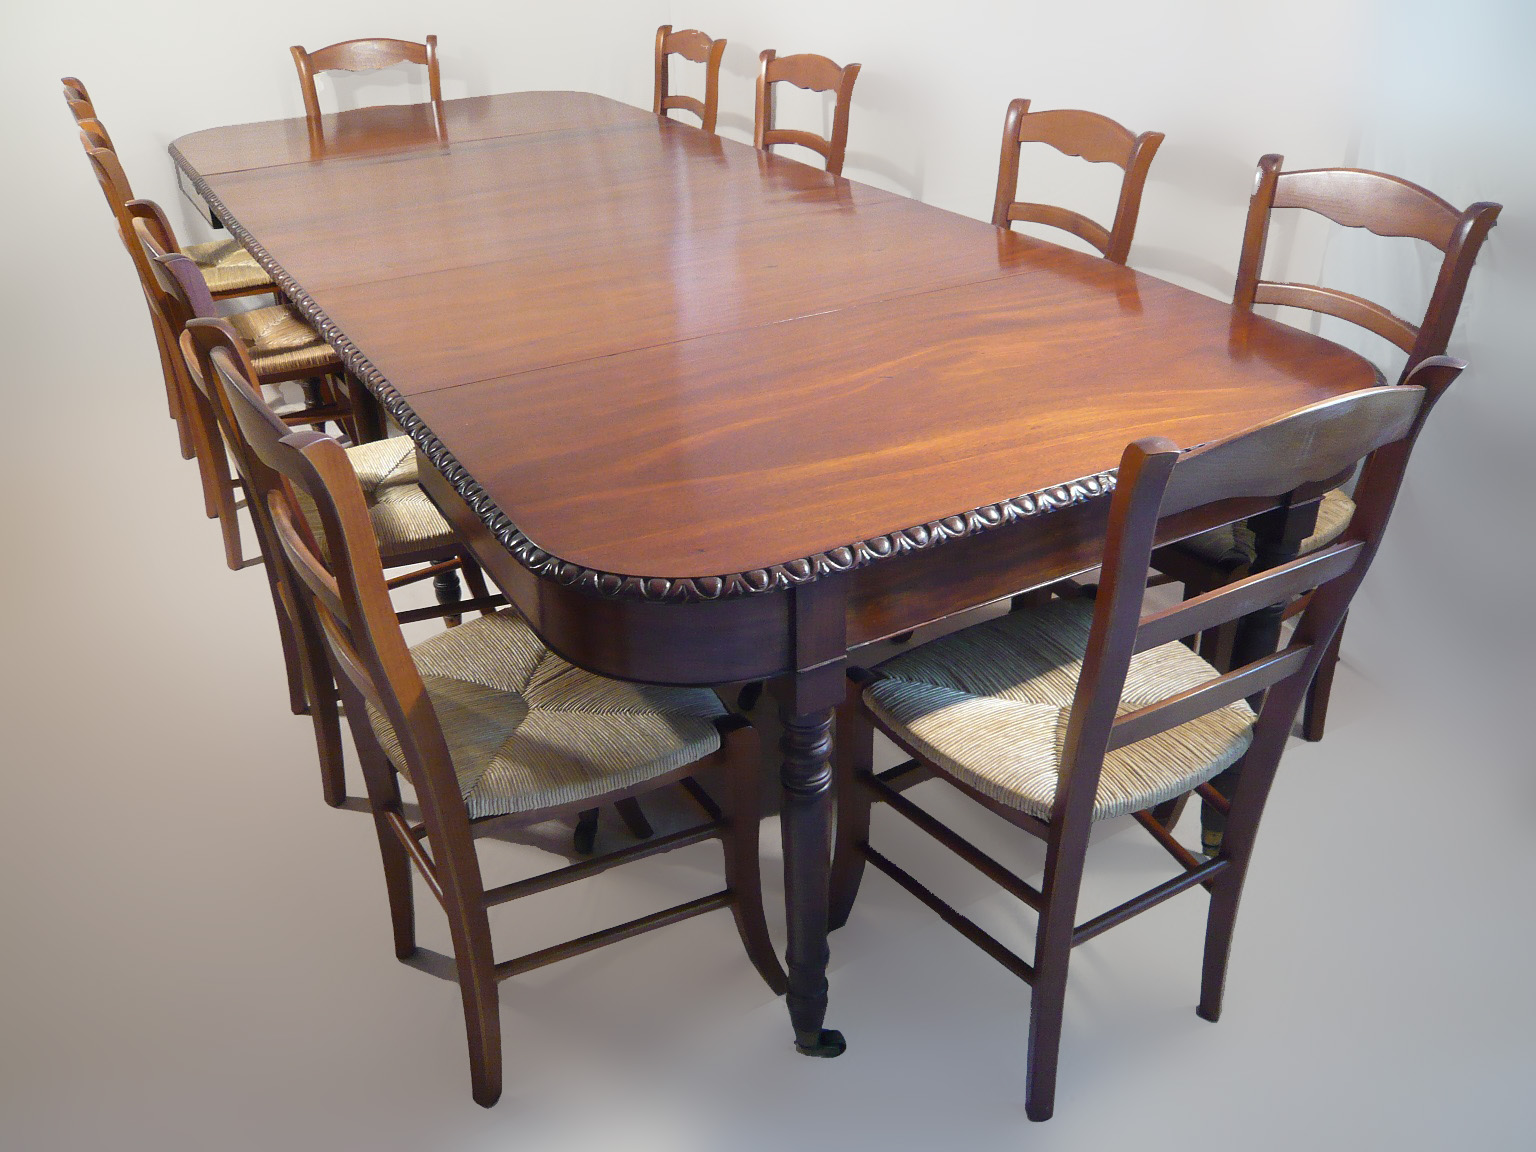 ANTIQUE - GEORGE III DINING TABLE AND A SET OF 10 CHAIRS - SUITE